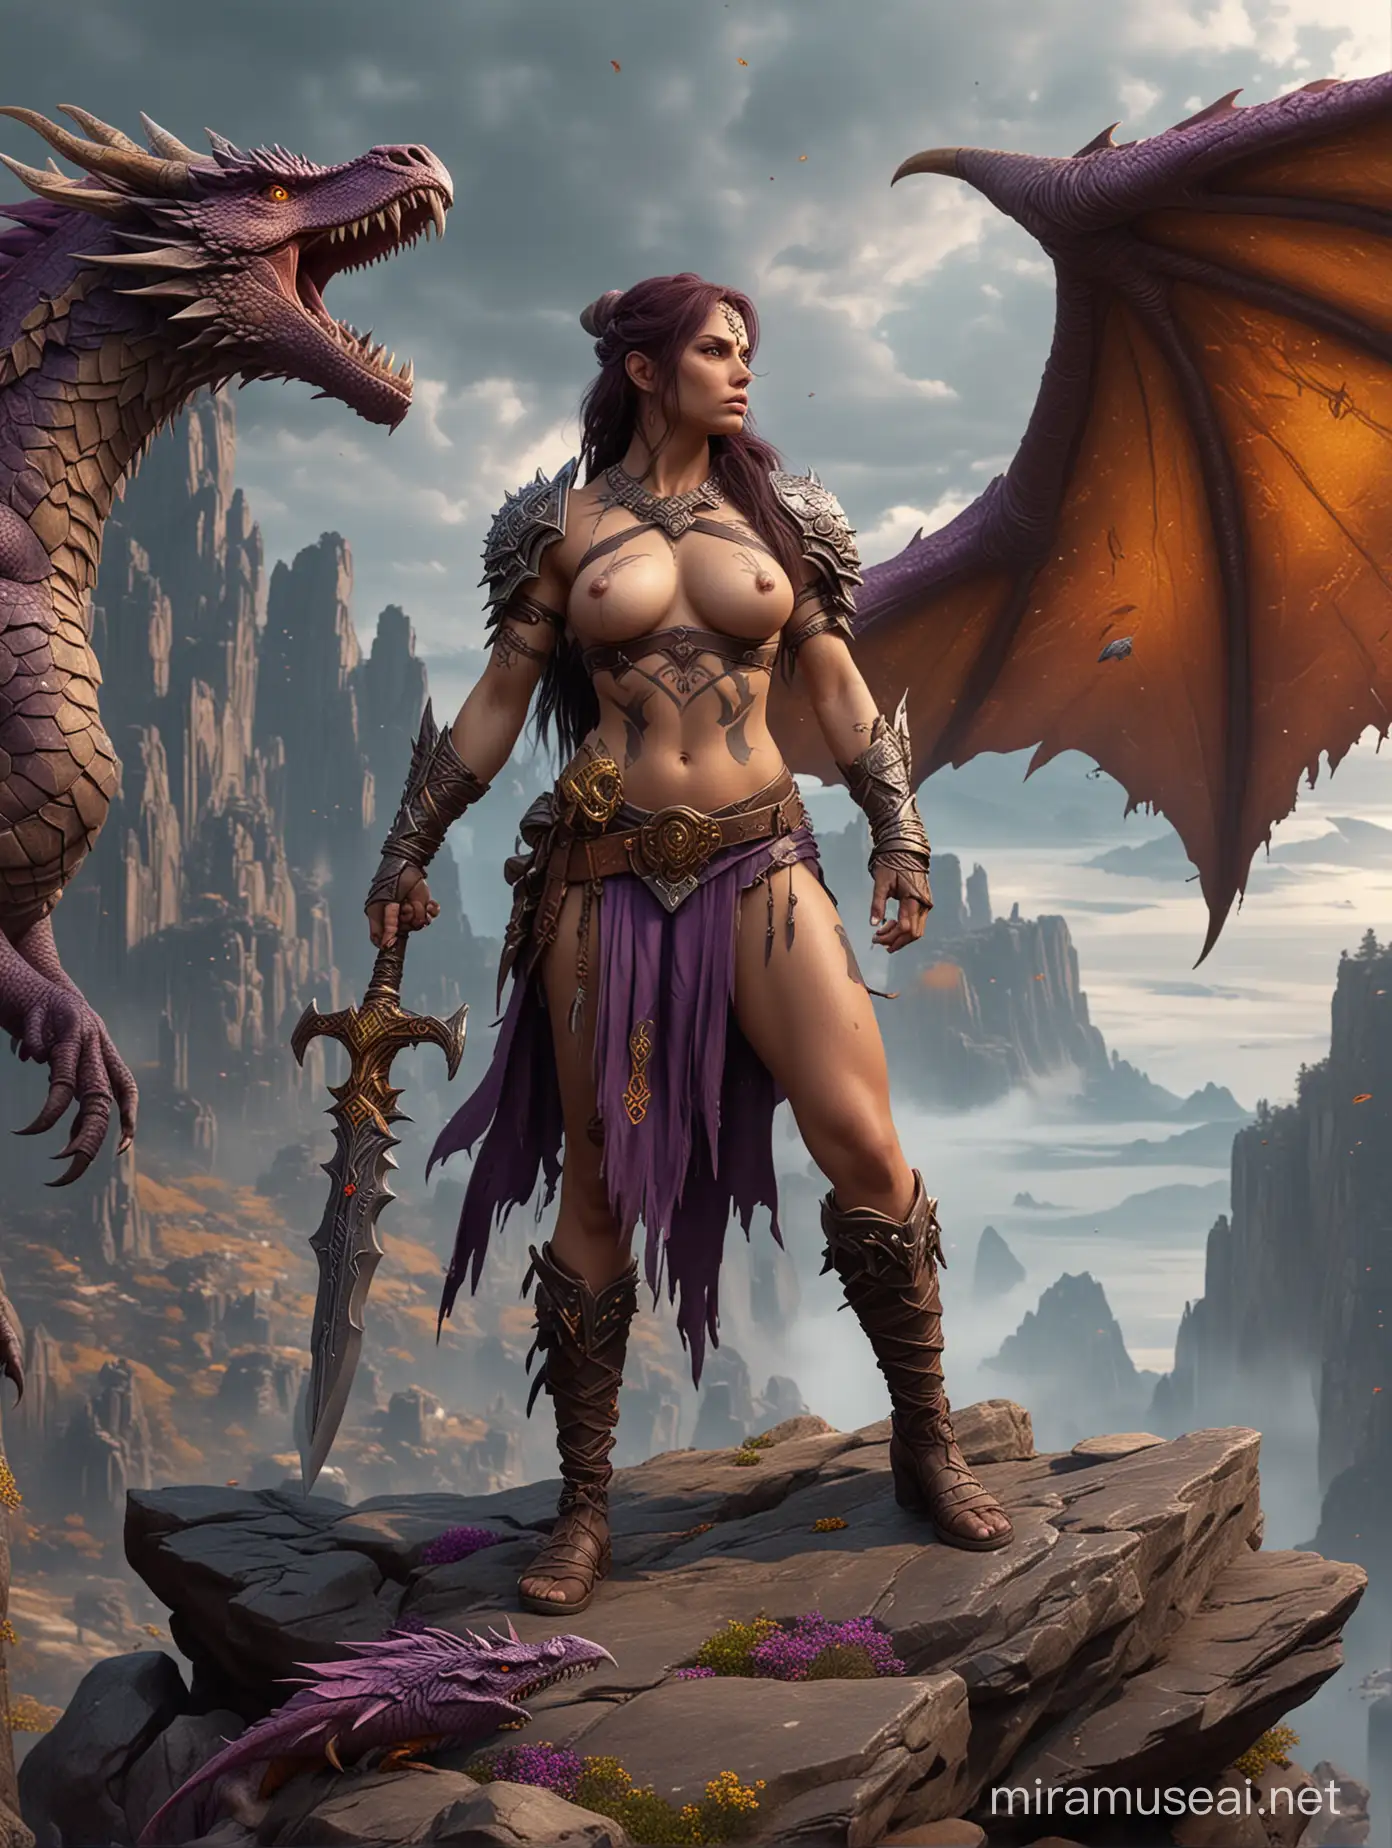 Dark Fantasy Barbarian Woman with Magical Tattoos Standing on Rock with Dragon Hyperdetailed Oil Painting